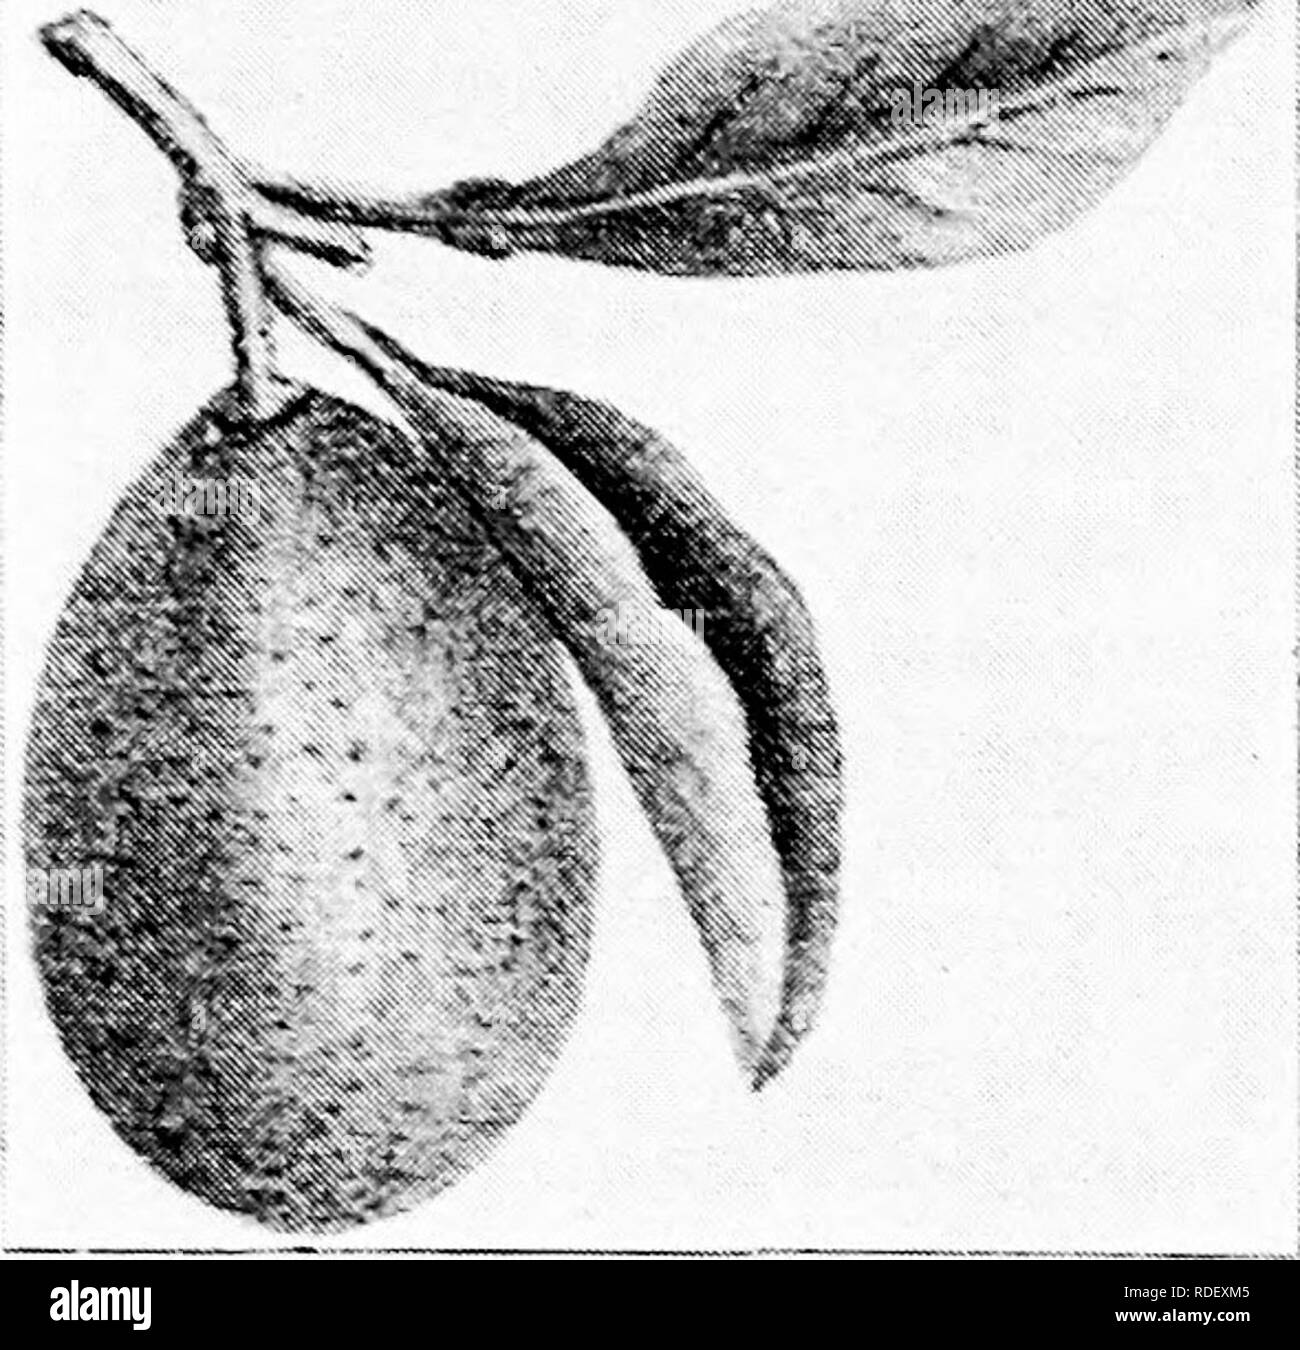 . Culture of the citrus in California . Citrus fruits; Fruit-culture. THE ORANGE IN CALIFORNIA—VARIETIES. 69. Olive-Shaped Kumqnut—natural size. Kumquat Type. Citrus aurantium, var. Japon- ica, Thunberg. Olive-Shaped.—Fruit very small,olive-shaped,rind thick, yellow, smooth, sweet scented, very little pulp,contains many seeds. Tree dwarf (a bush), four to six feet; a very prolific bearer. The fruit is edible whole; the rind has a pleas- ant aroma. Valuable for pre- serves and marmalades.. Please note that these images are extracted from scanned page images that may have been digitally enhanced Stock Photo